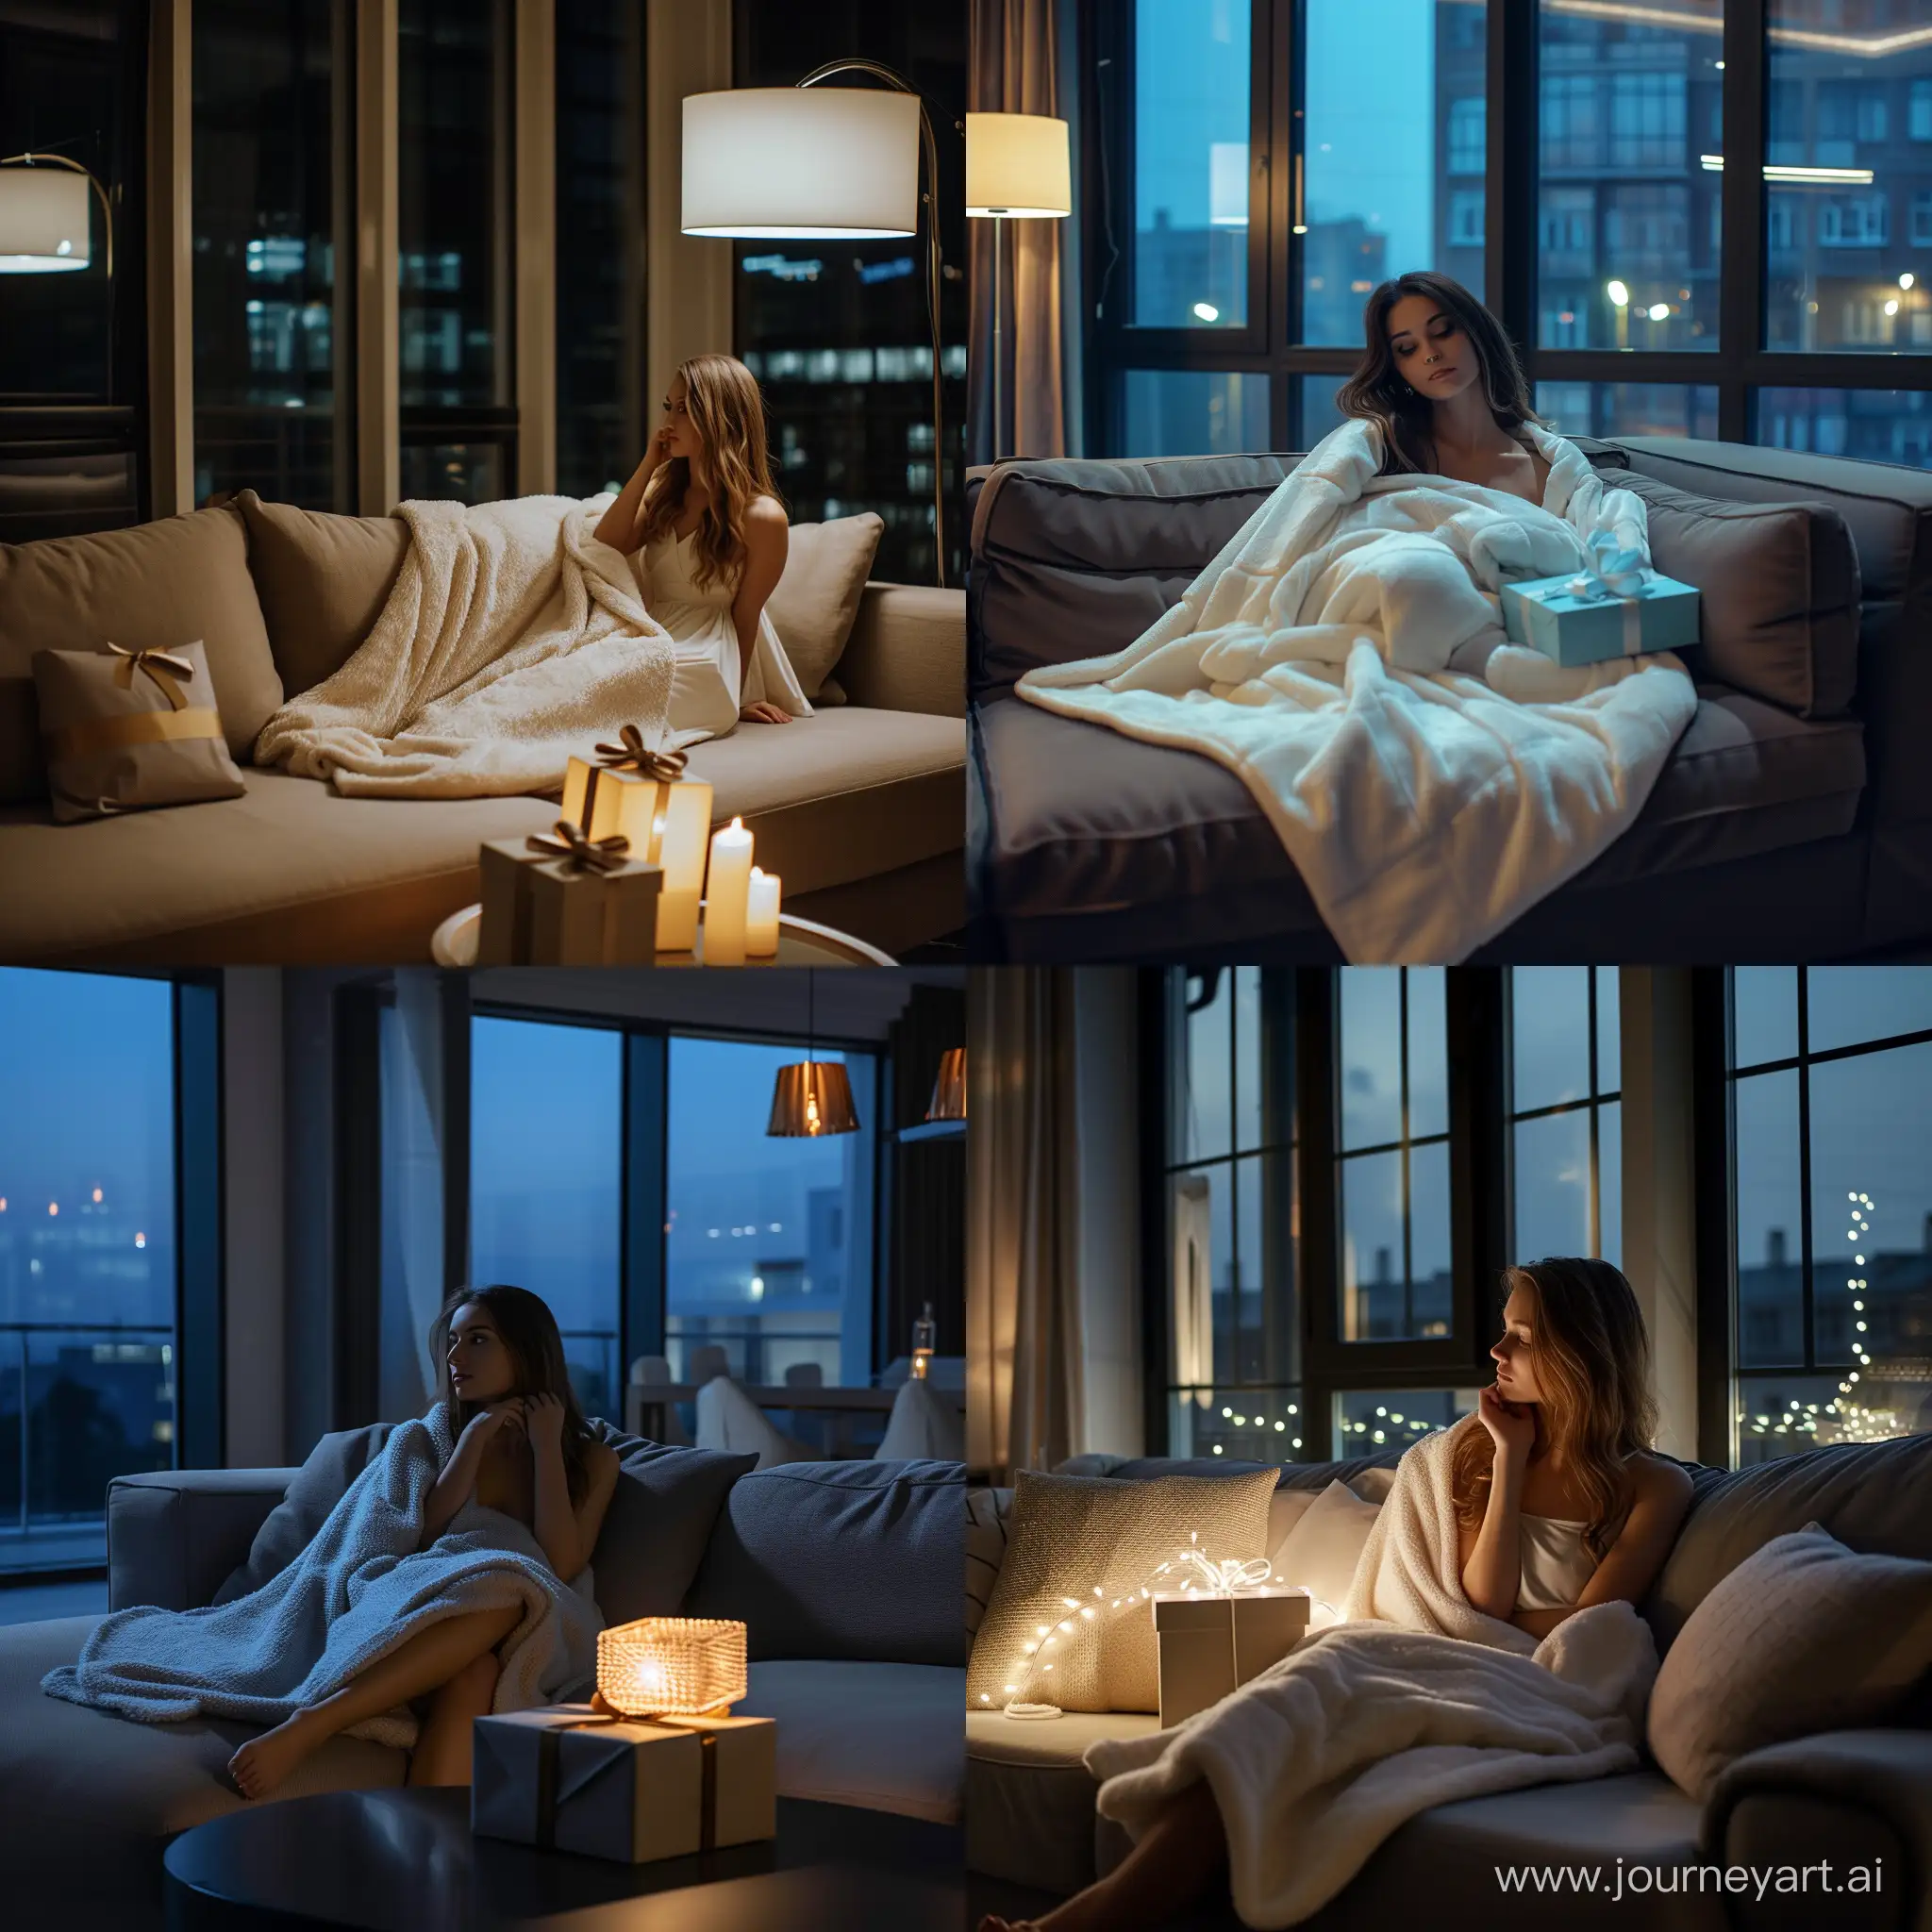 Cozy-Gift-Beautiful-Girl-with-Soft-Blanket-in-Dark-Bachelor-Apartment